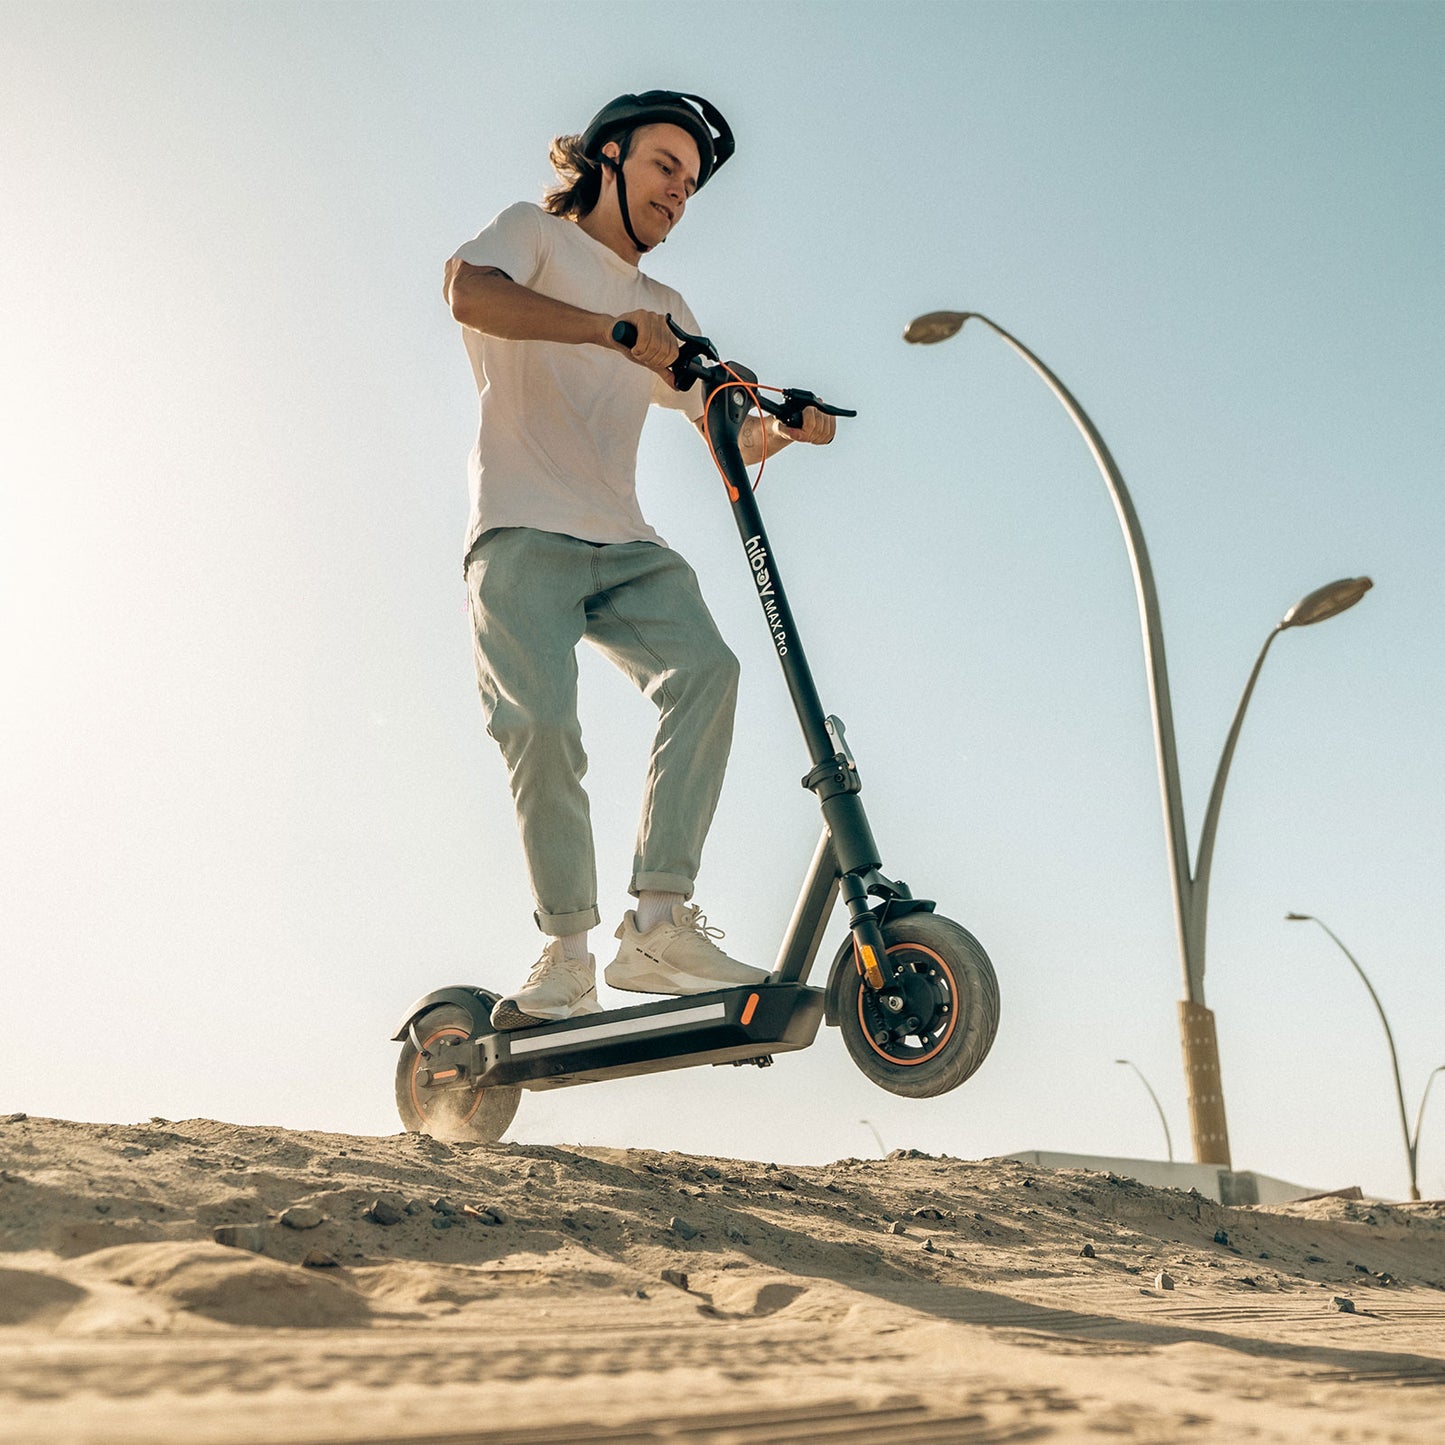 Hiboy MAX Pro Electric Scooter